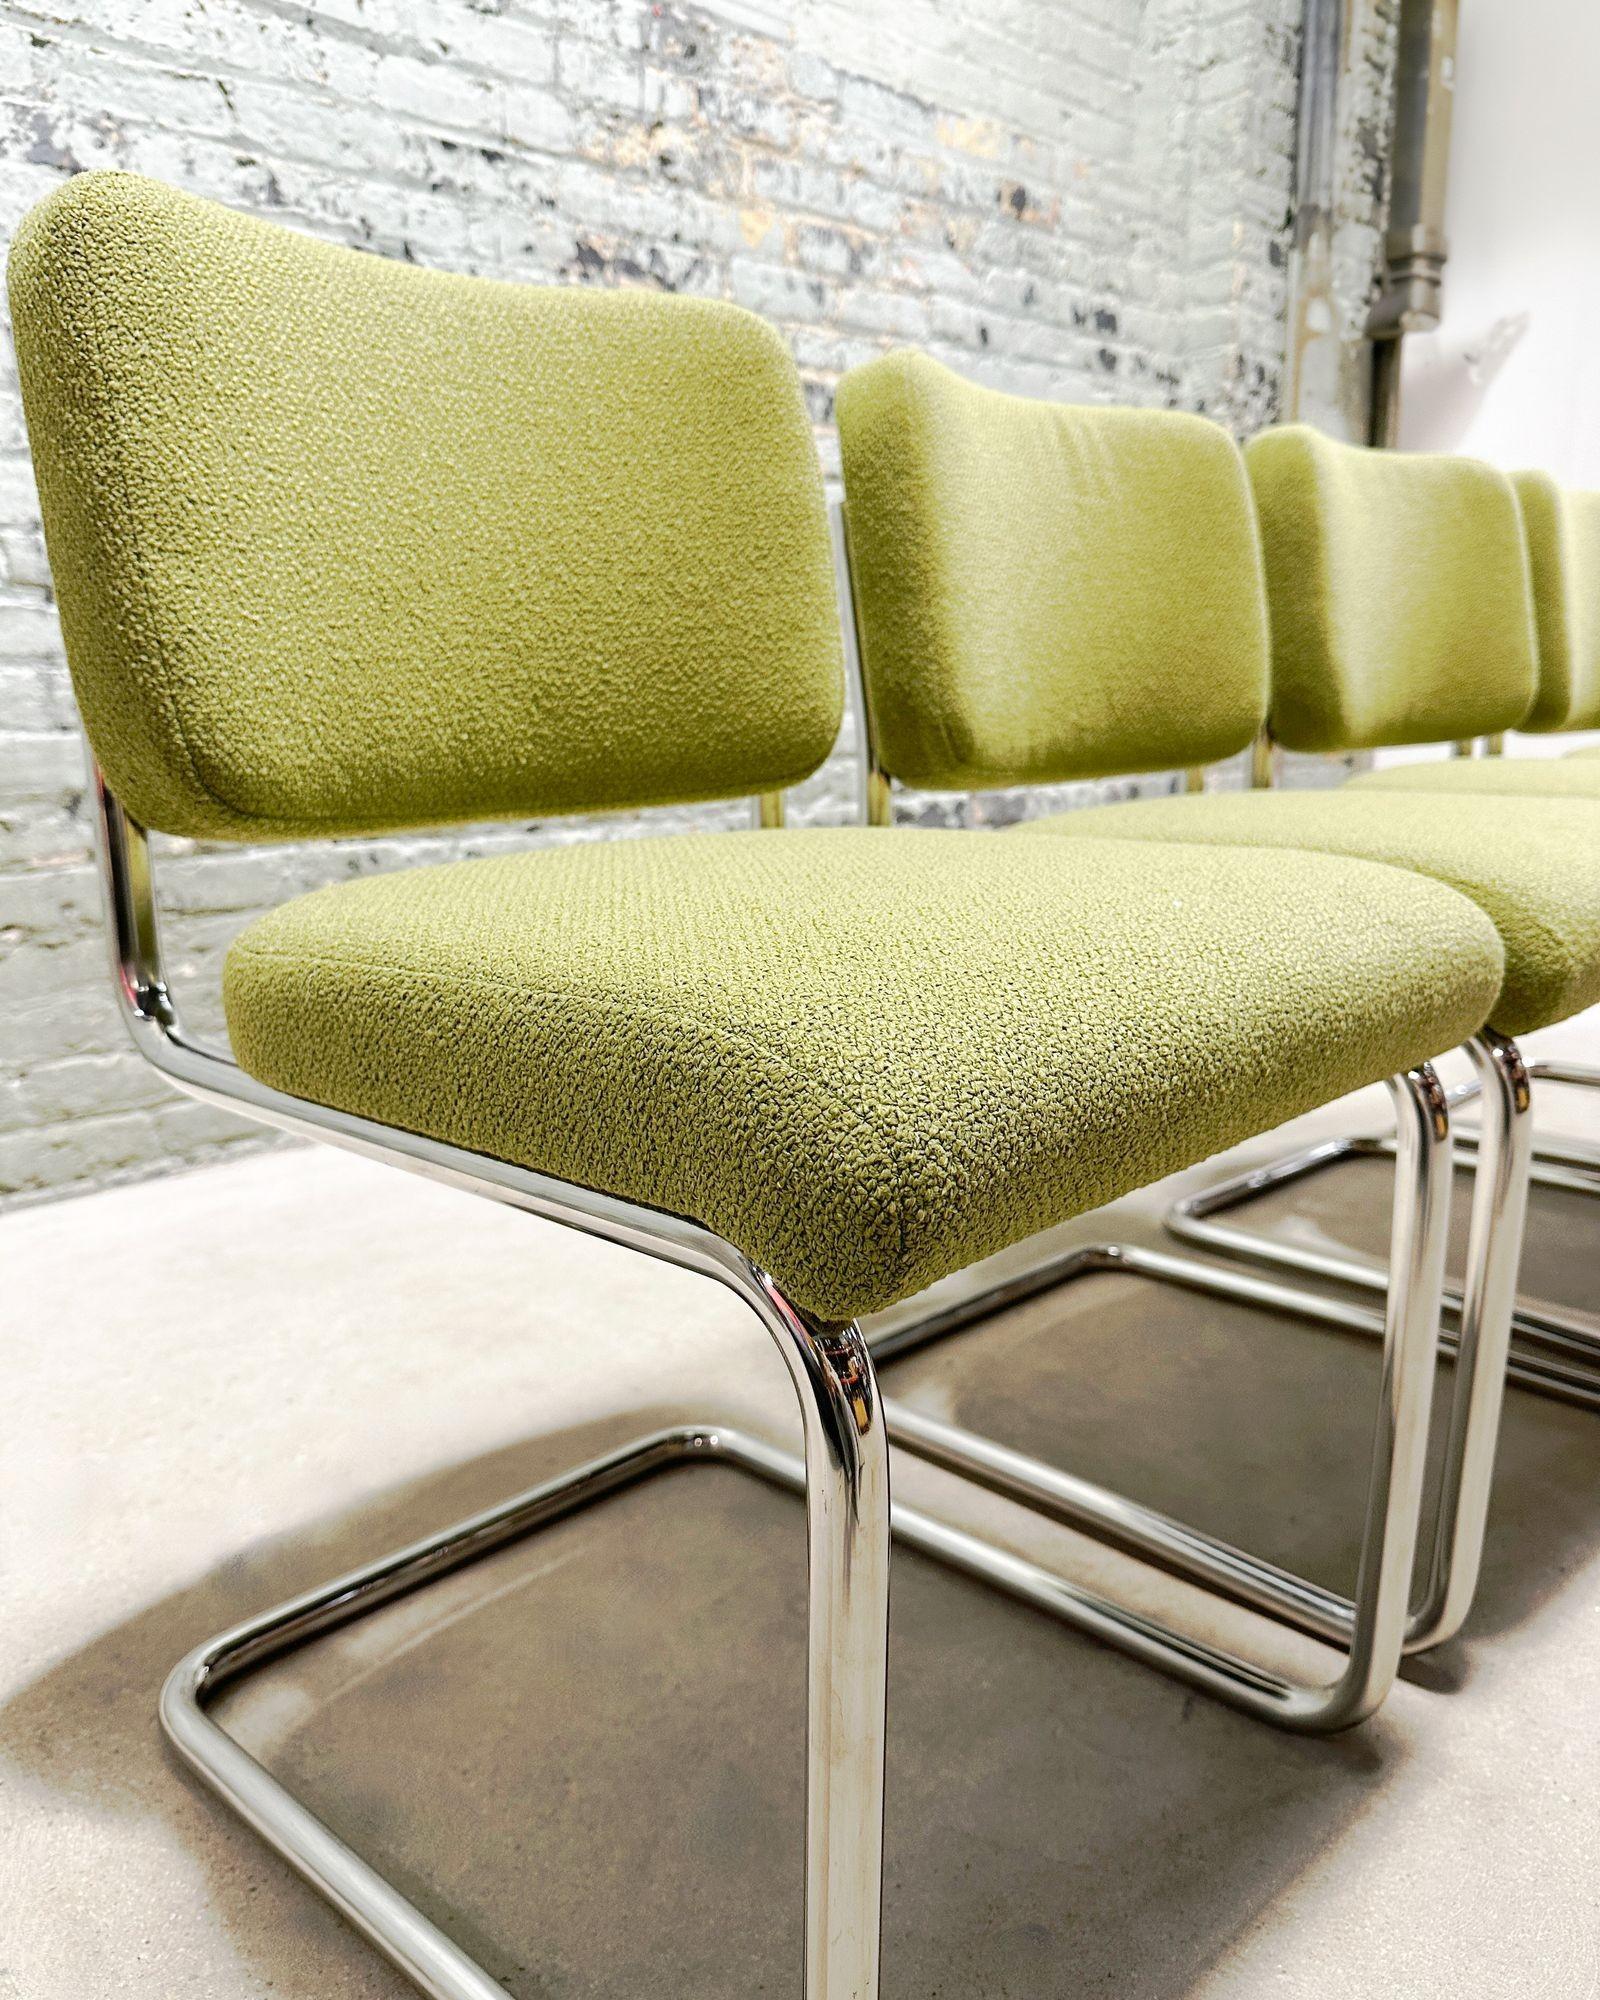 Marcel Breuer for Knoll Cesca Side/Dining Chairs, 1980. Newly reupholstered green boucle.
6 of the green chairs have sold. We have a large quantity of these chairs. You are welcome to send your own COM and we will reupholster at no additional